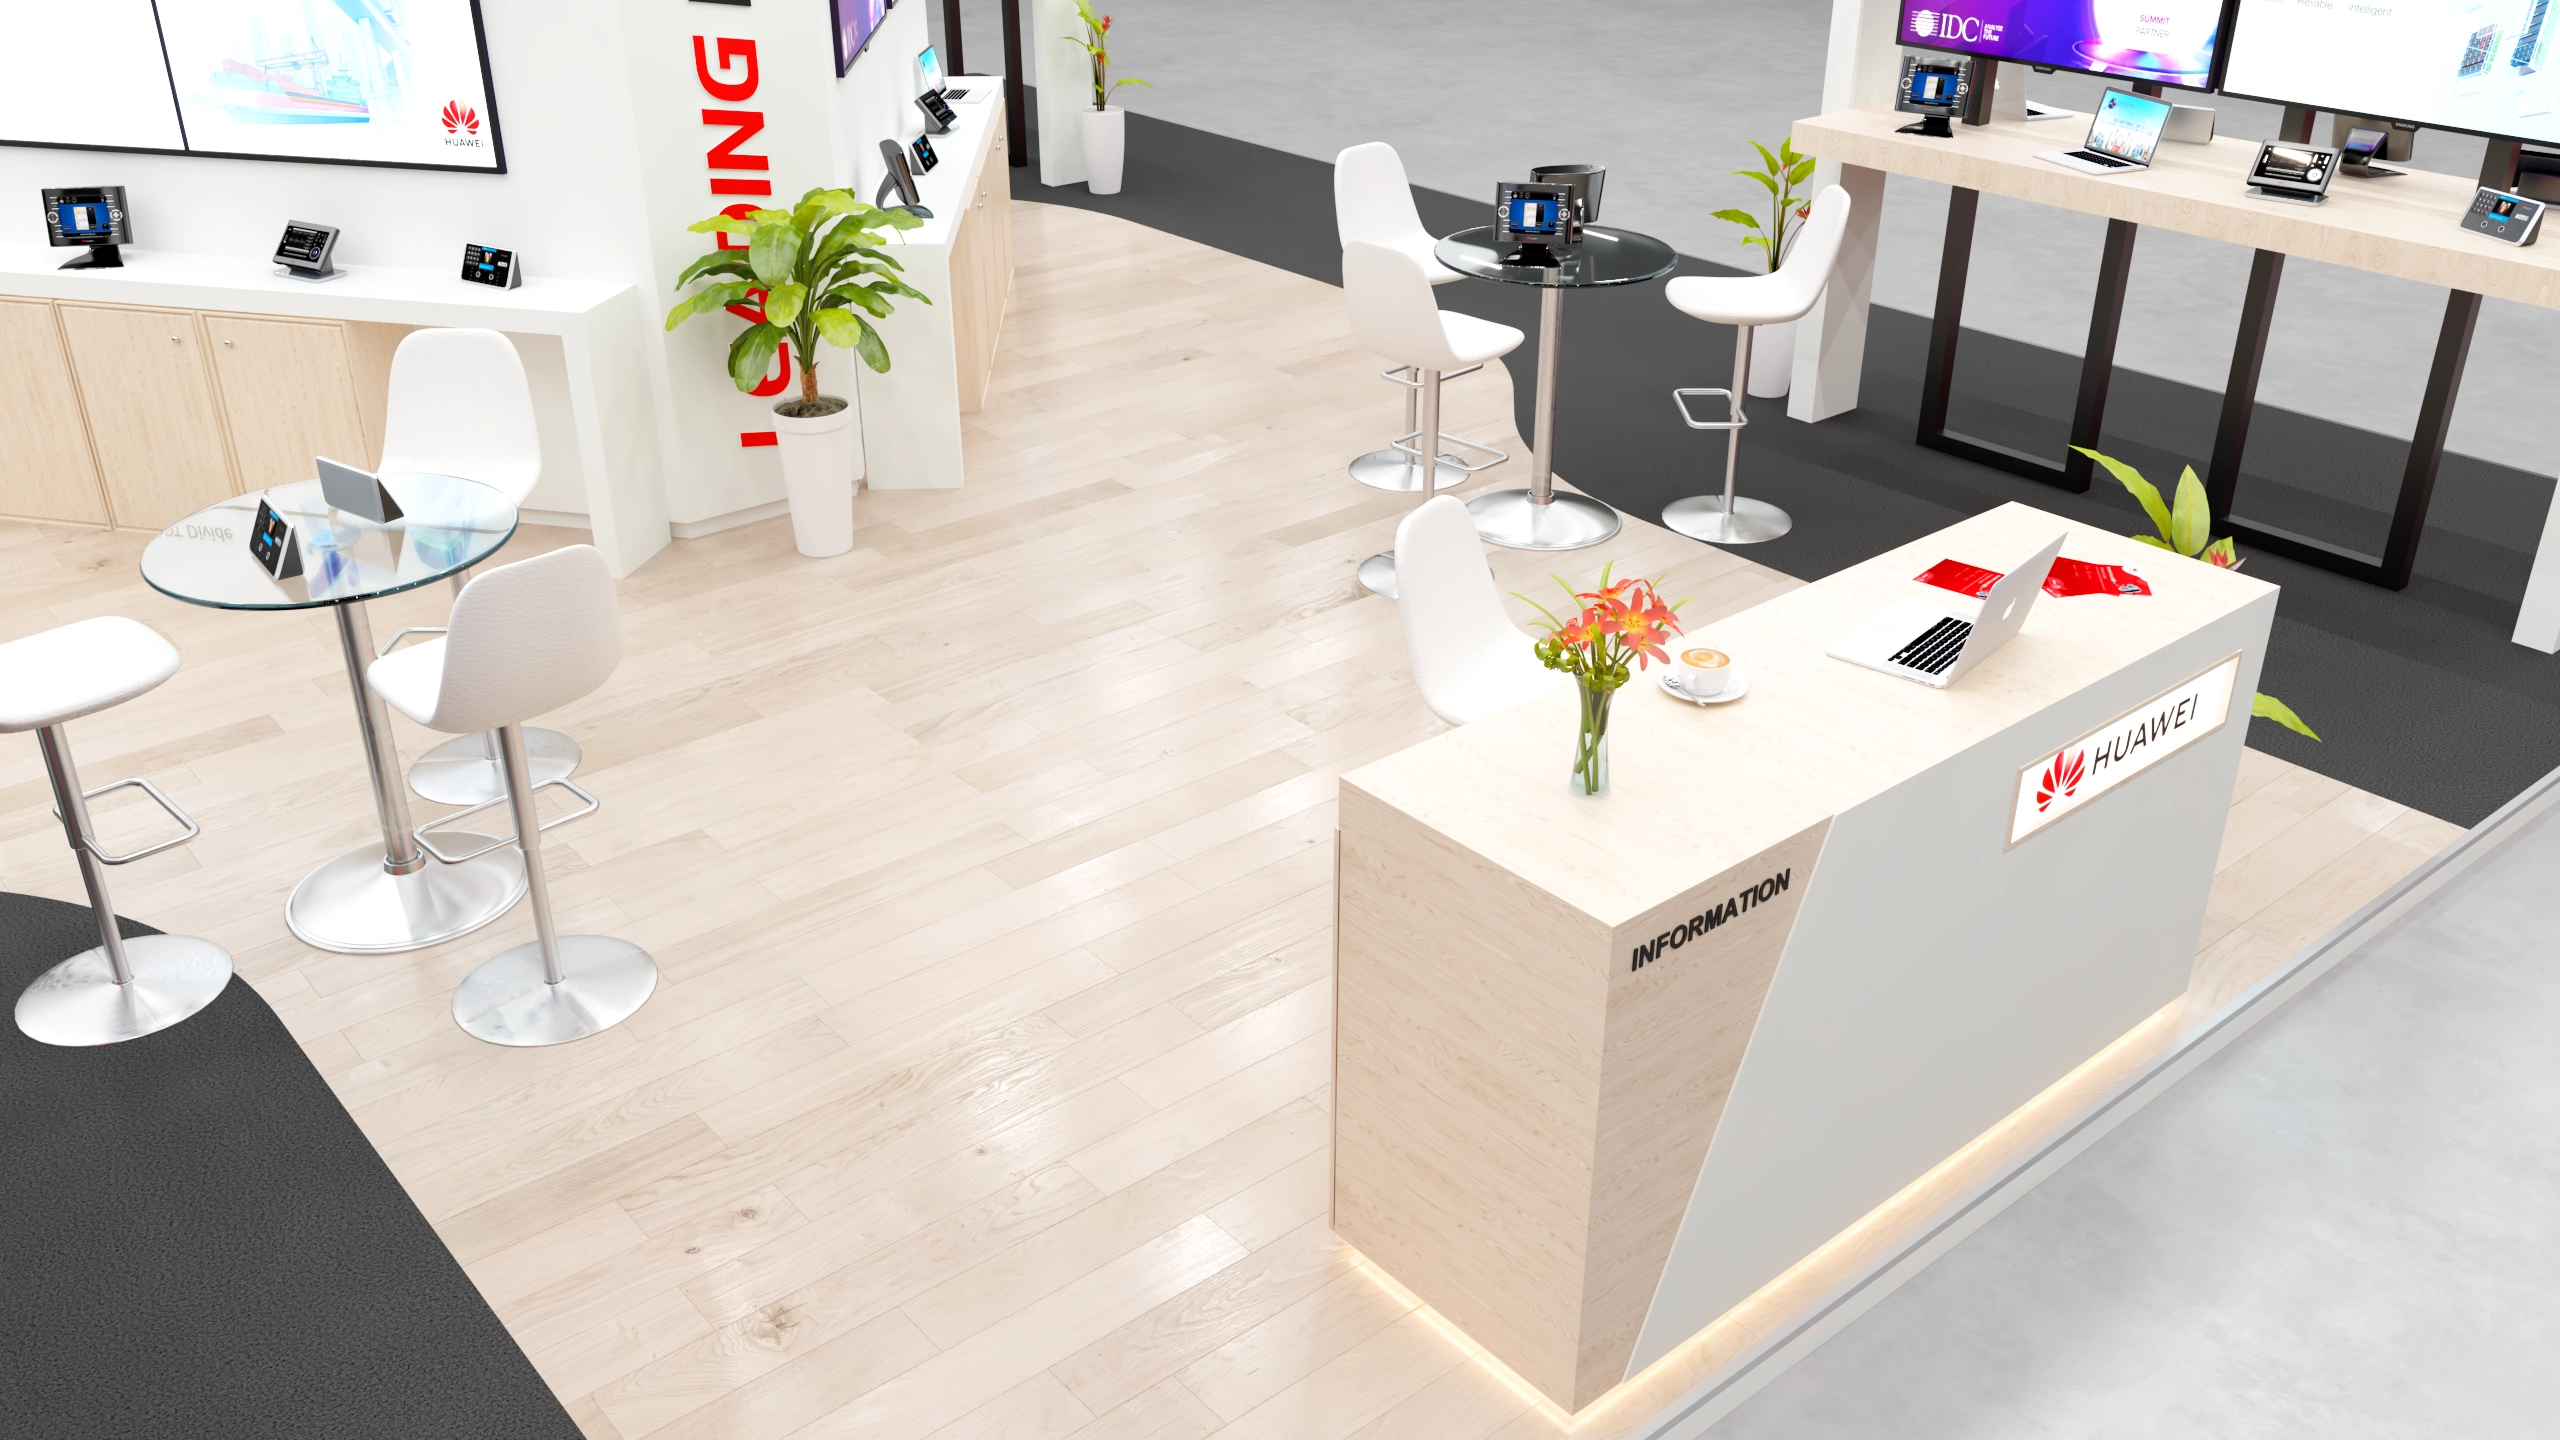 Stand Huawei - ASEC 2019 _3D 08